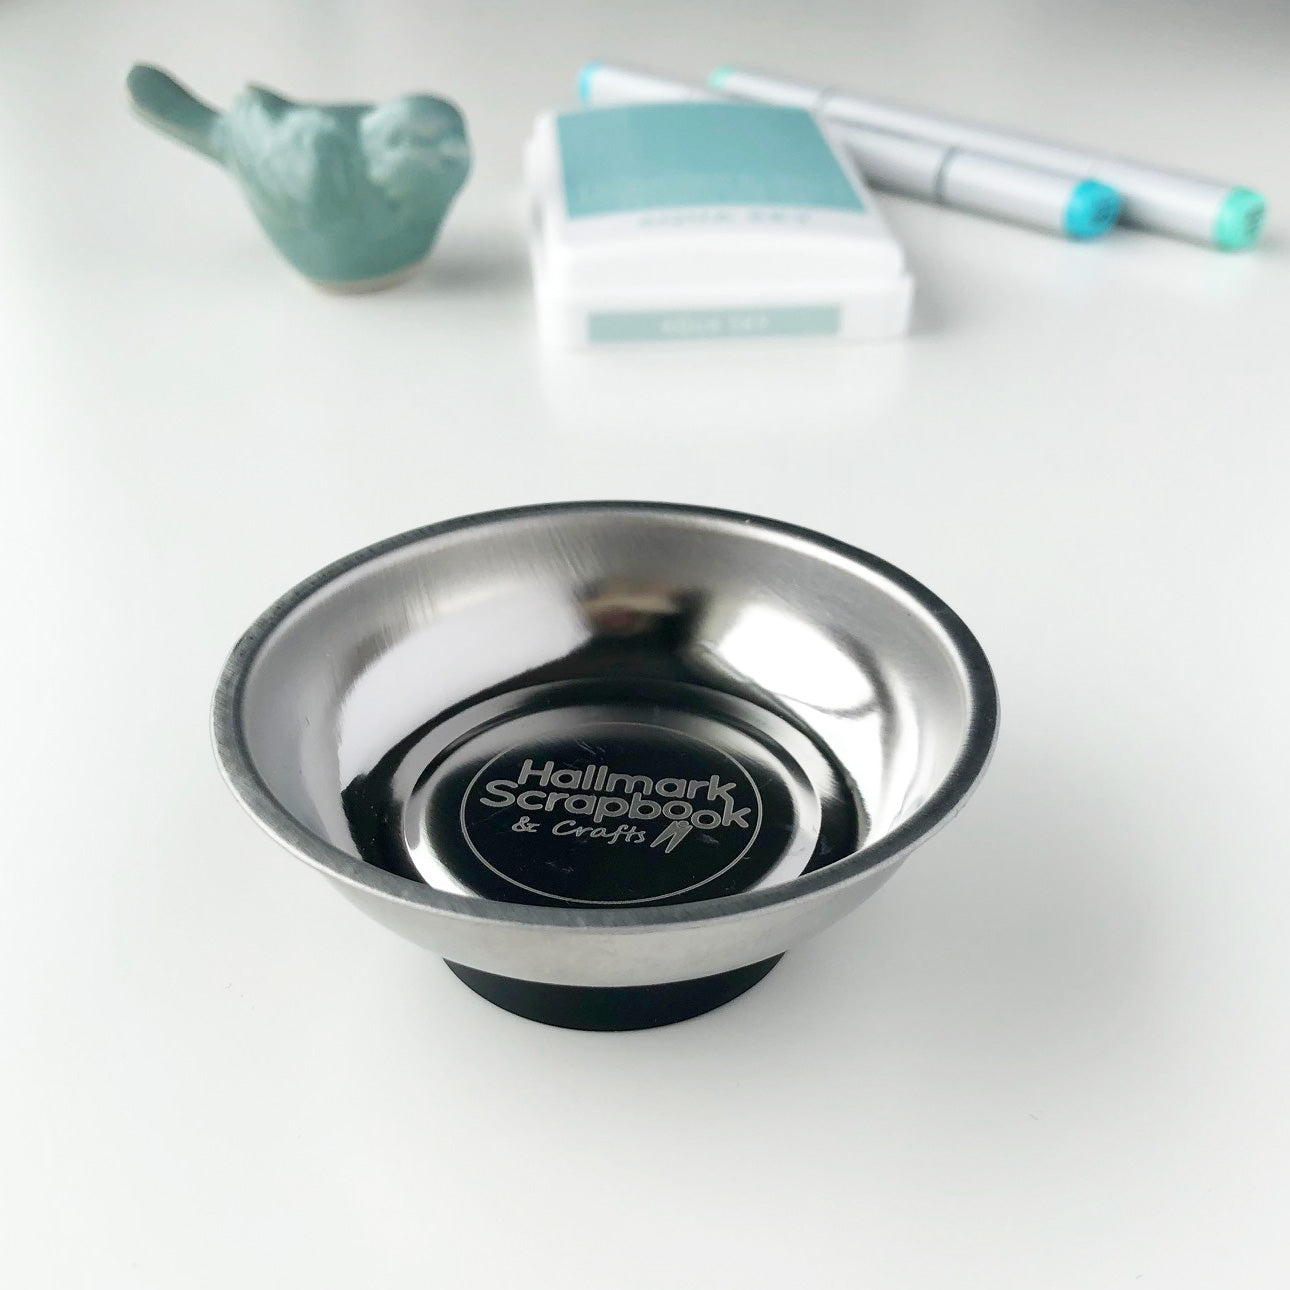 Hallmark Scrapbook - 3 Magnetic Bowl - For dies and other small items! -  20% OFF!